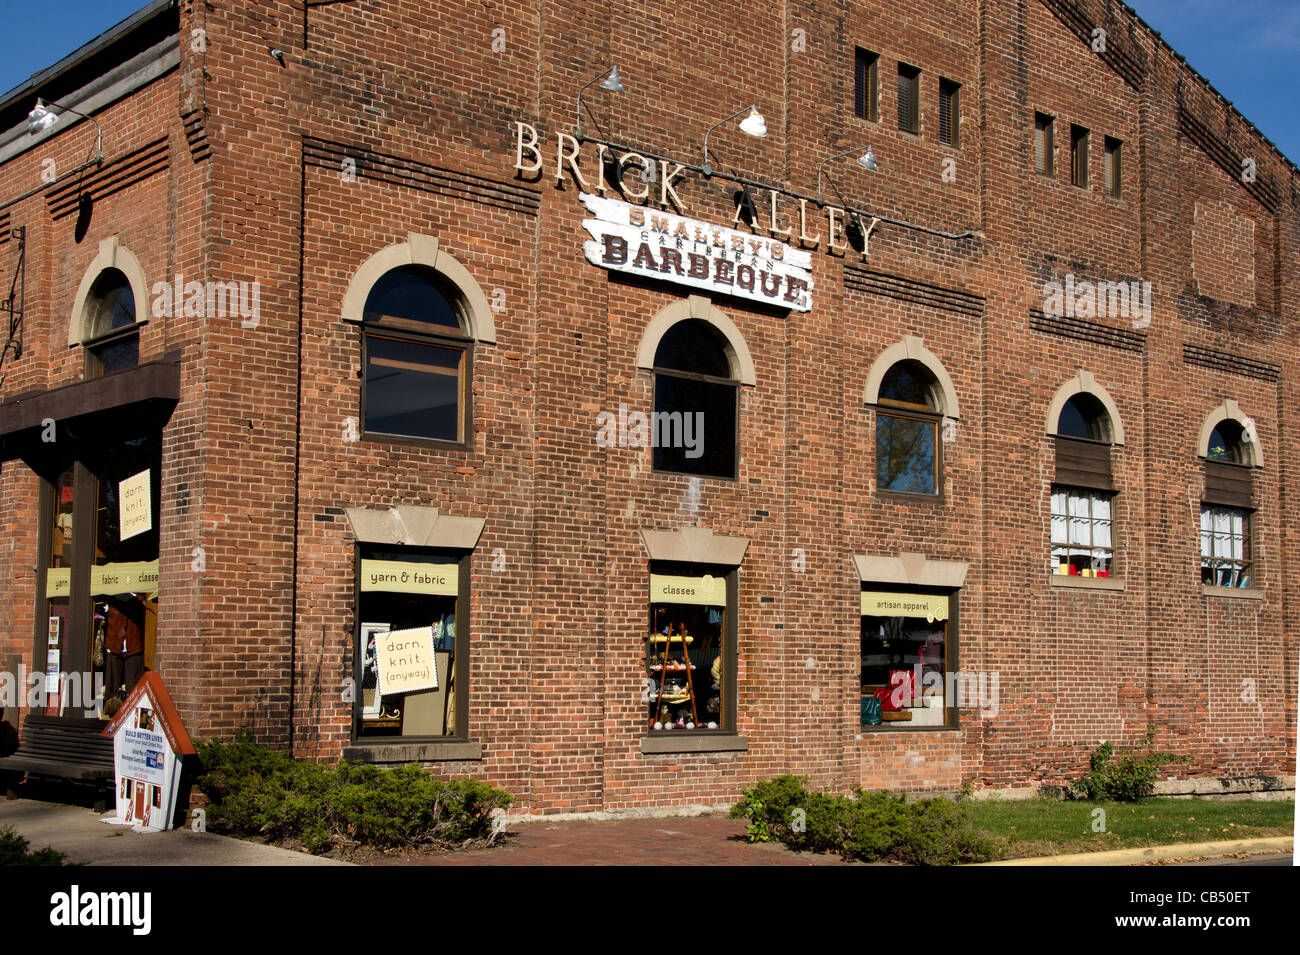 The Brick Alley is a historic building in Stillwater, Minnesota where many shops are located. Stock Photo